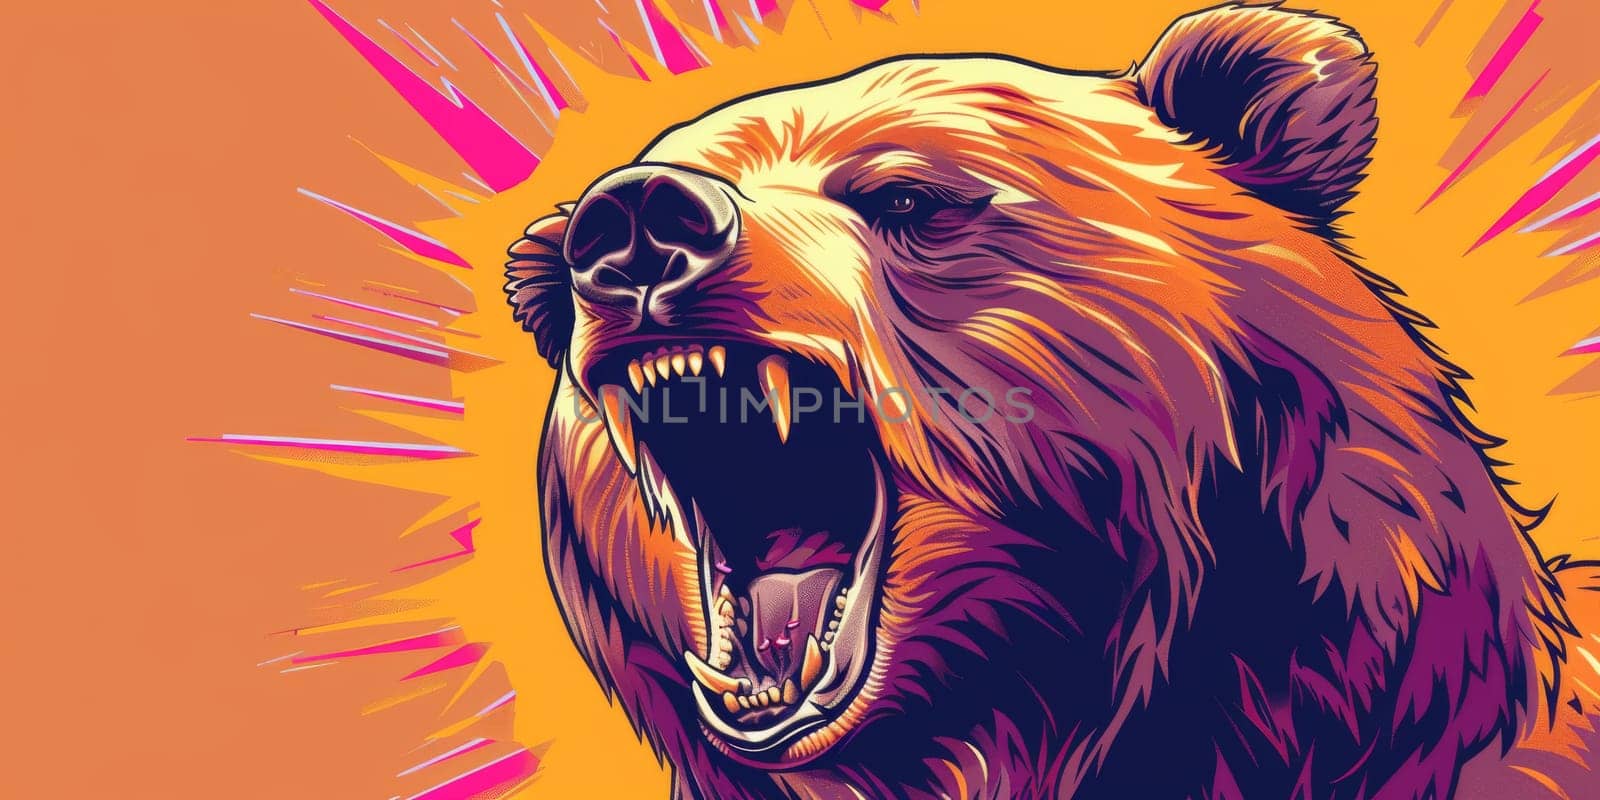 Portrait of shouting, angry bear as a pop art style